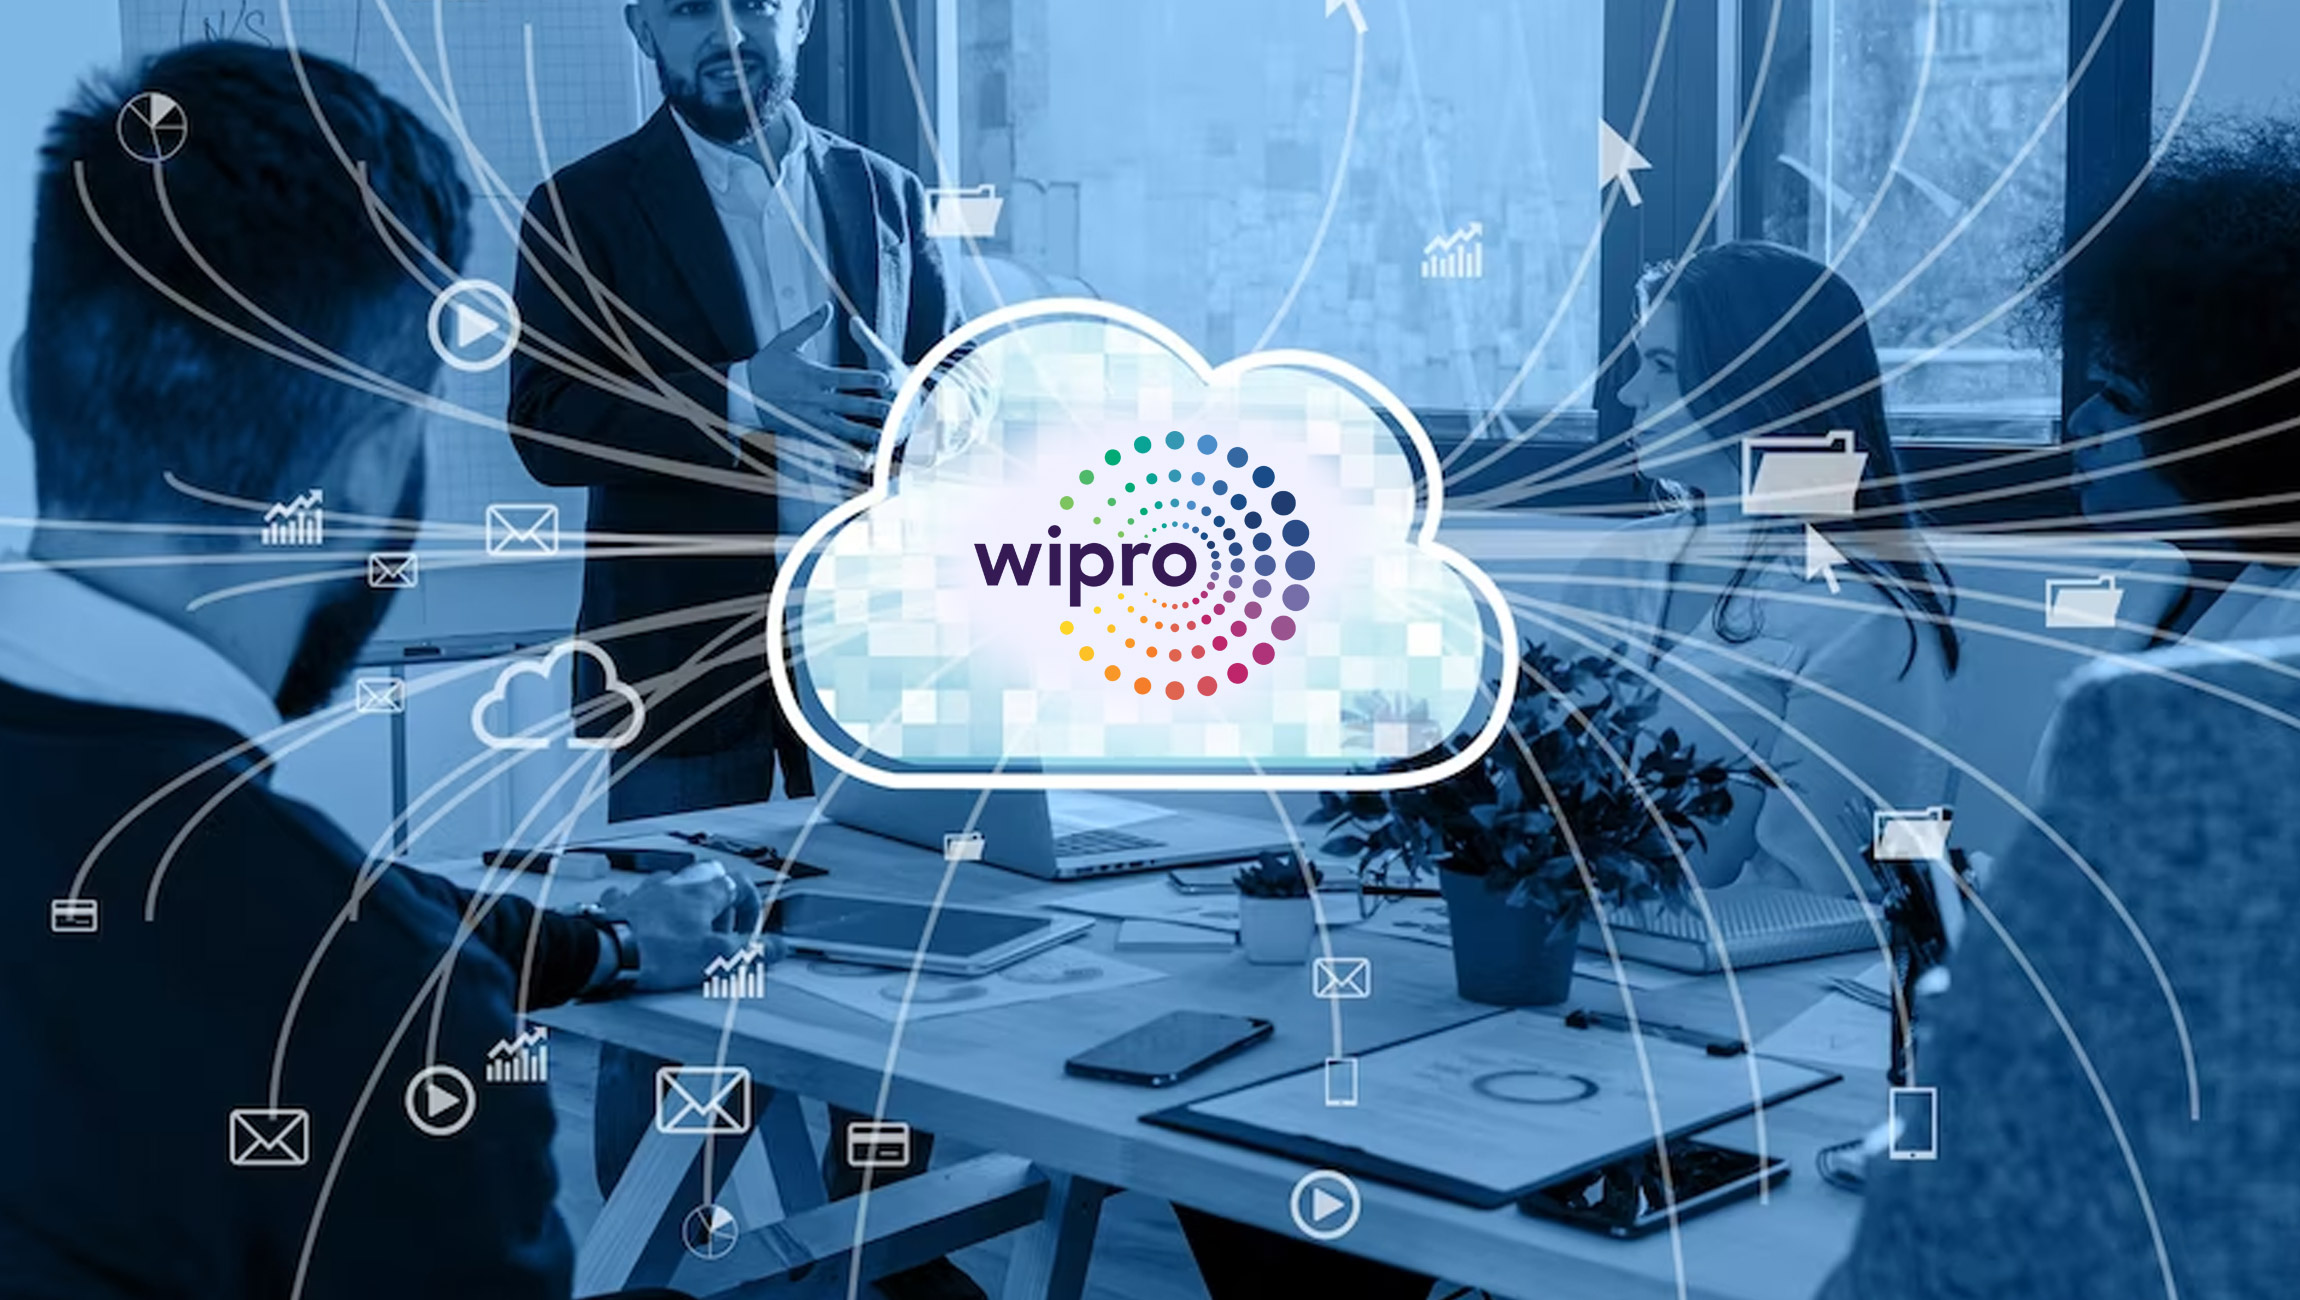 Wipro Announces a New Global Business Line Model to Deepen Alignment with Client Priorities